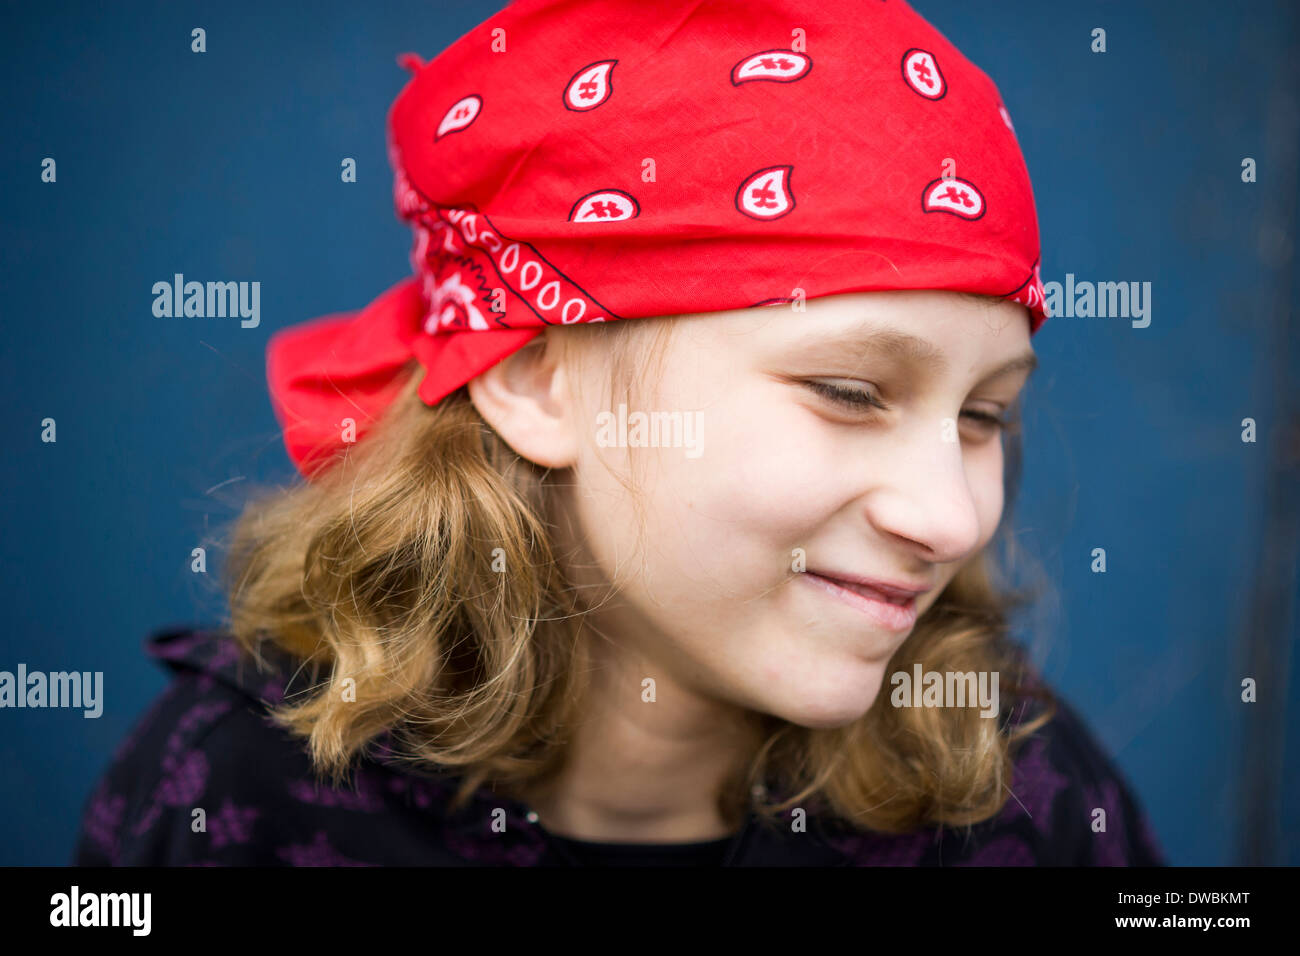 Portrait of smiling girl with red headscarf Stock Photo